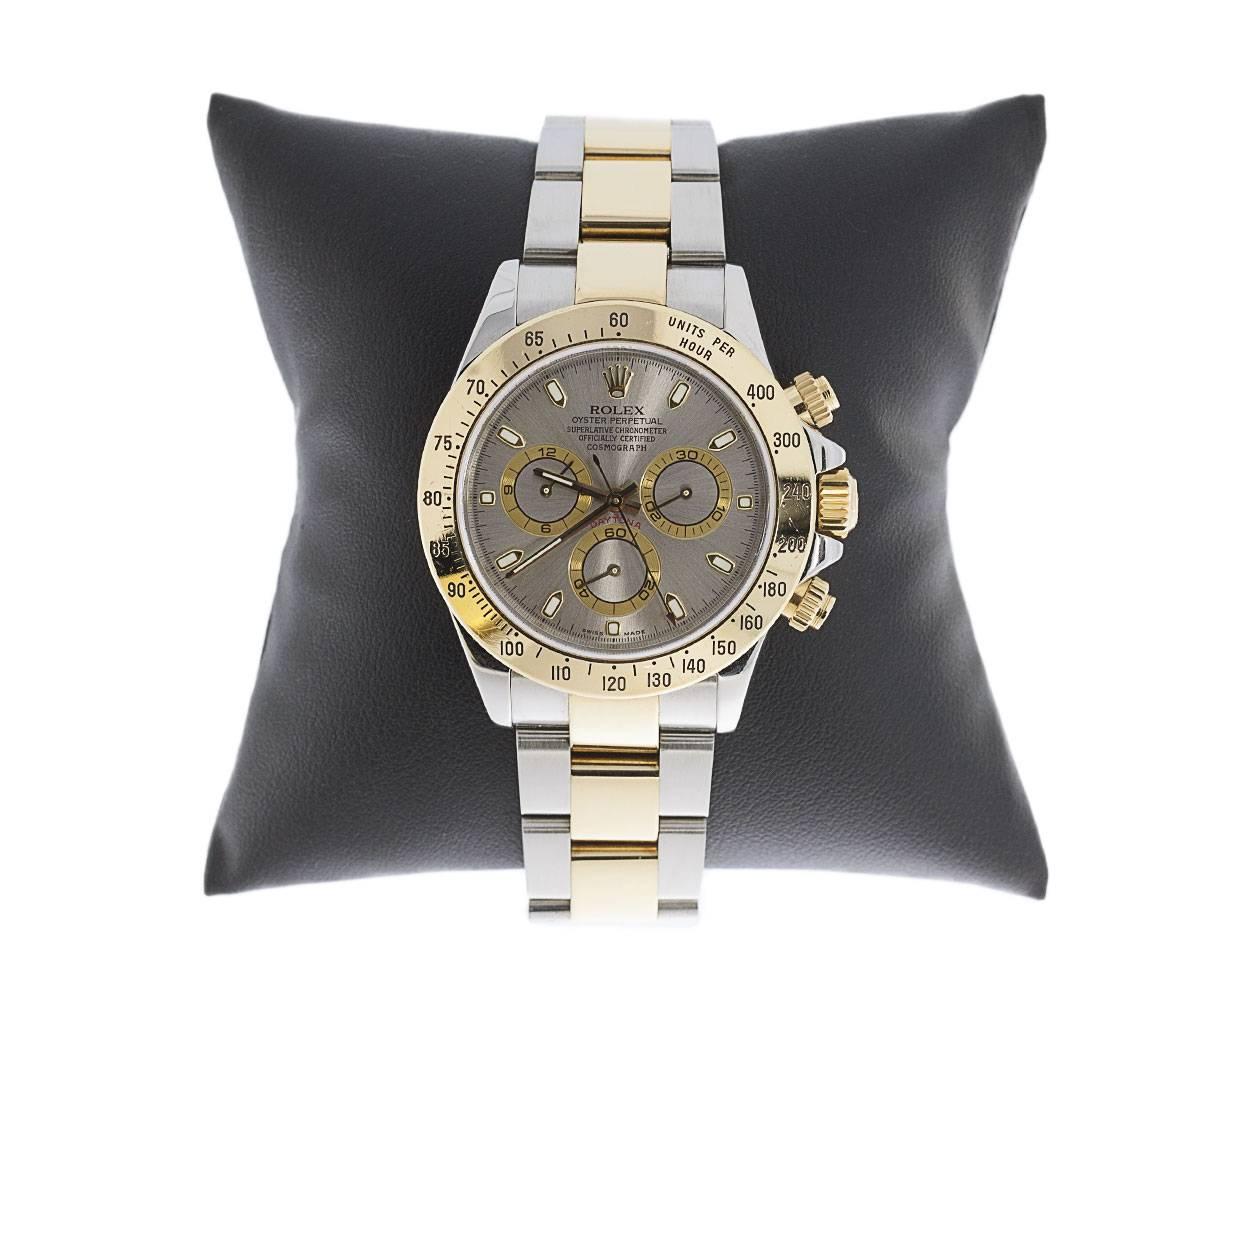 This Rolex Two-Tone Daytona Cosmograph is a classic. If you are looking for a superbly made watch with timeless style, look no further. The watch features a 40 mm stainless steel and 18K yellow gold case. The bezel is 40mm and is made of stainless